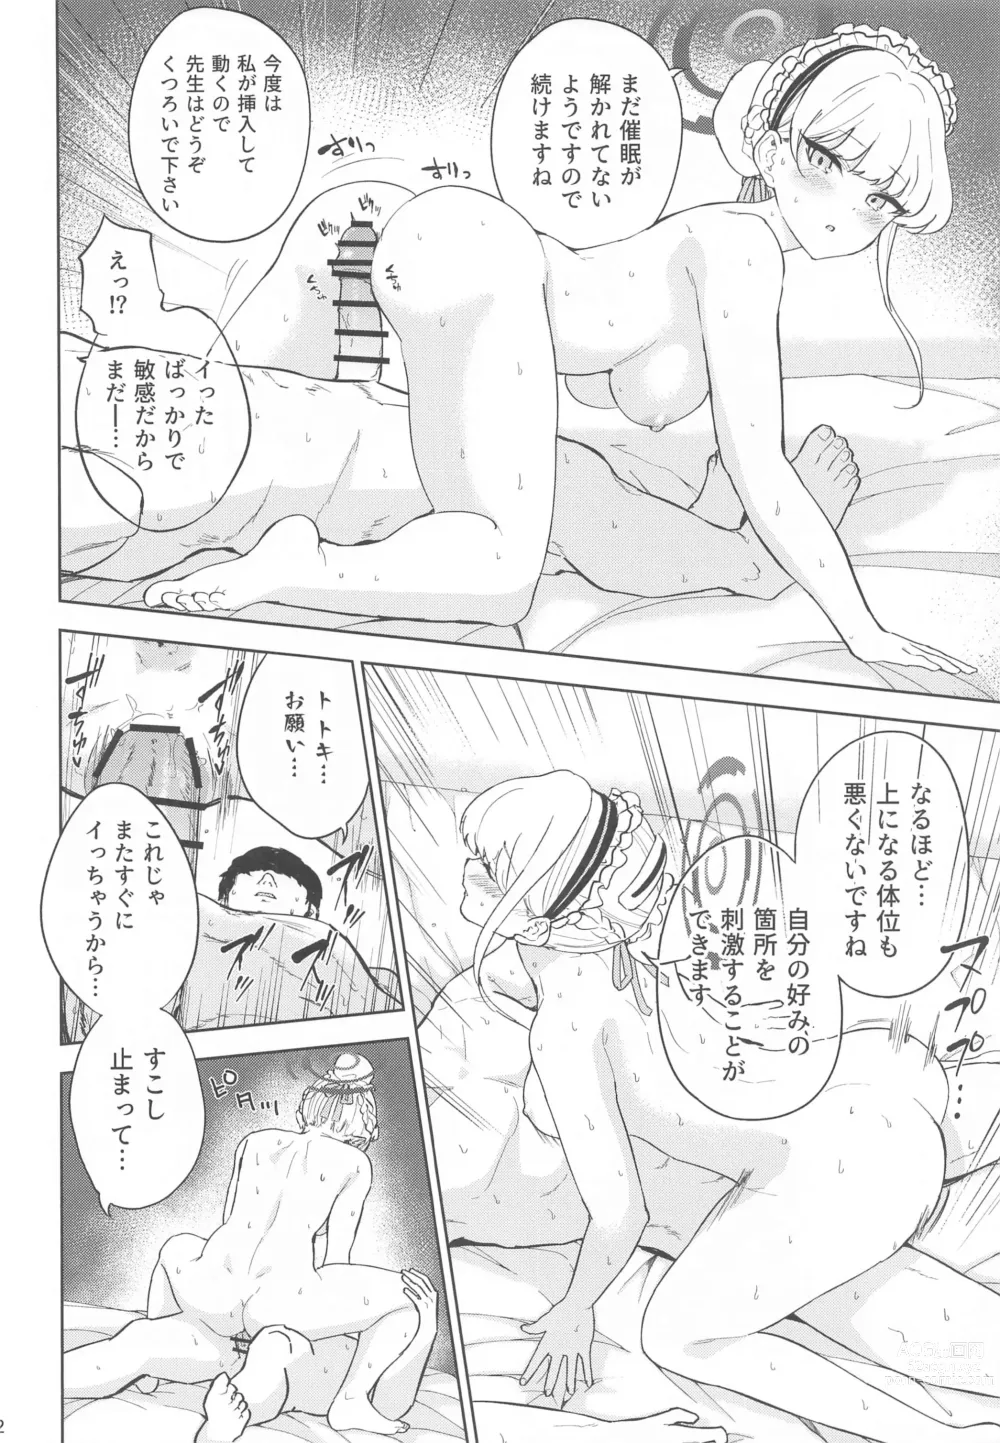 Page 23 of doujinshi Made in Maid